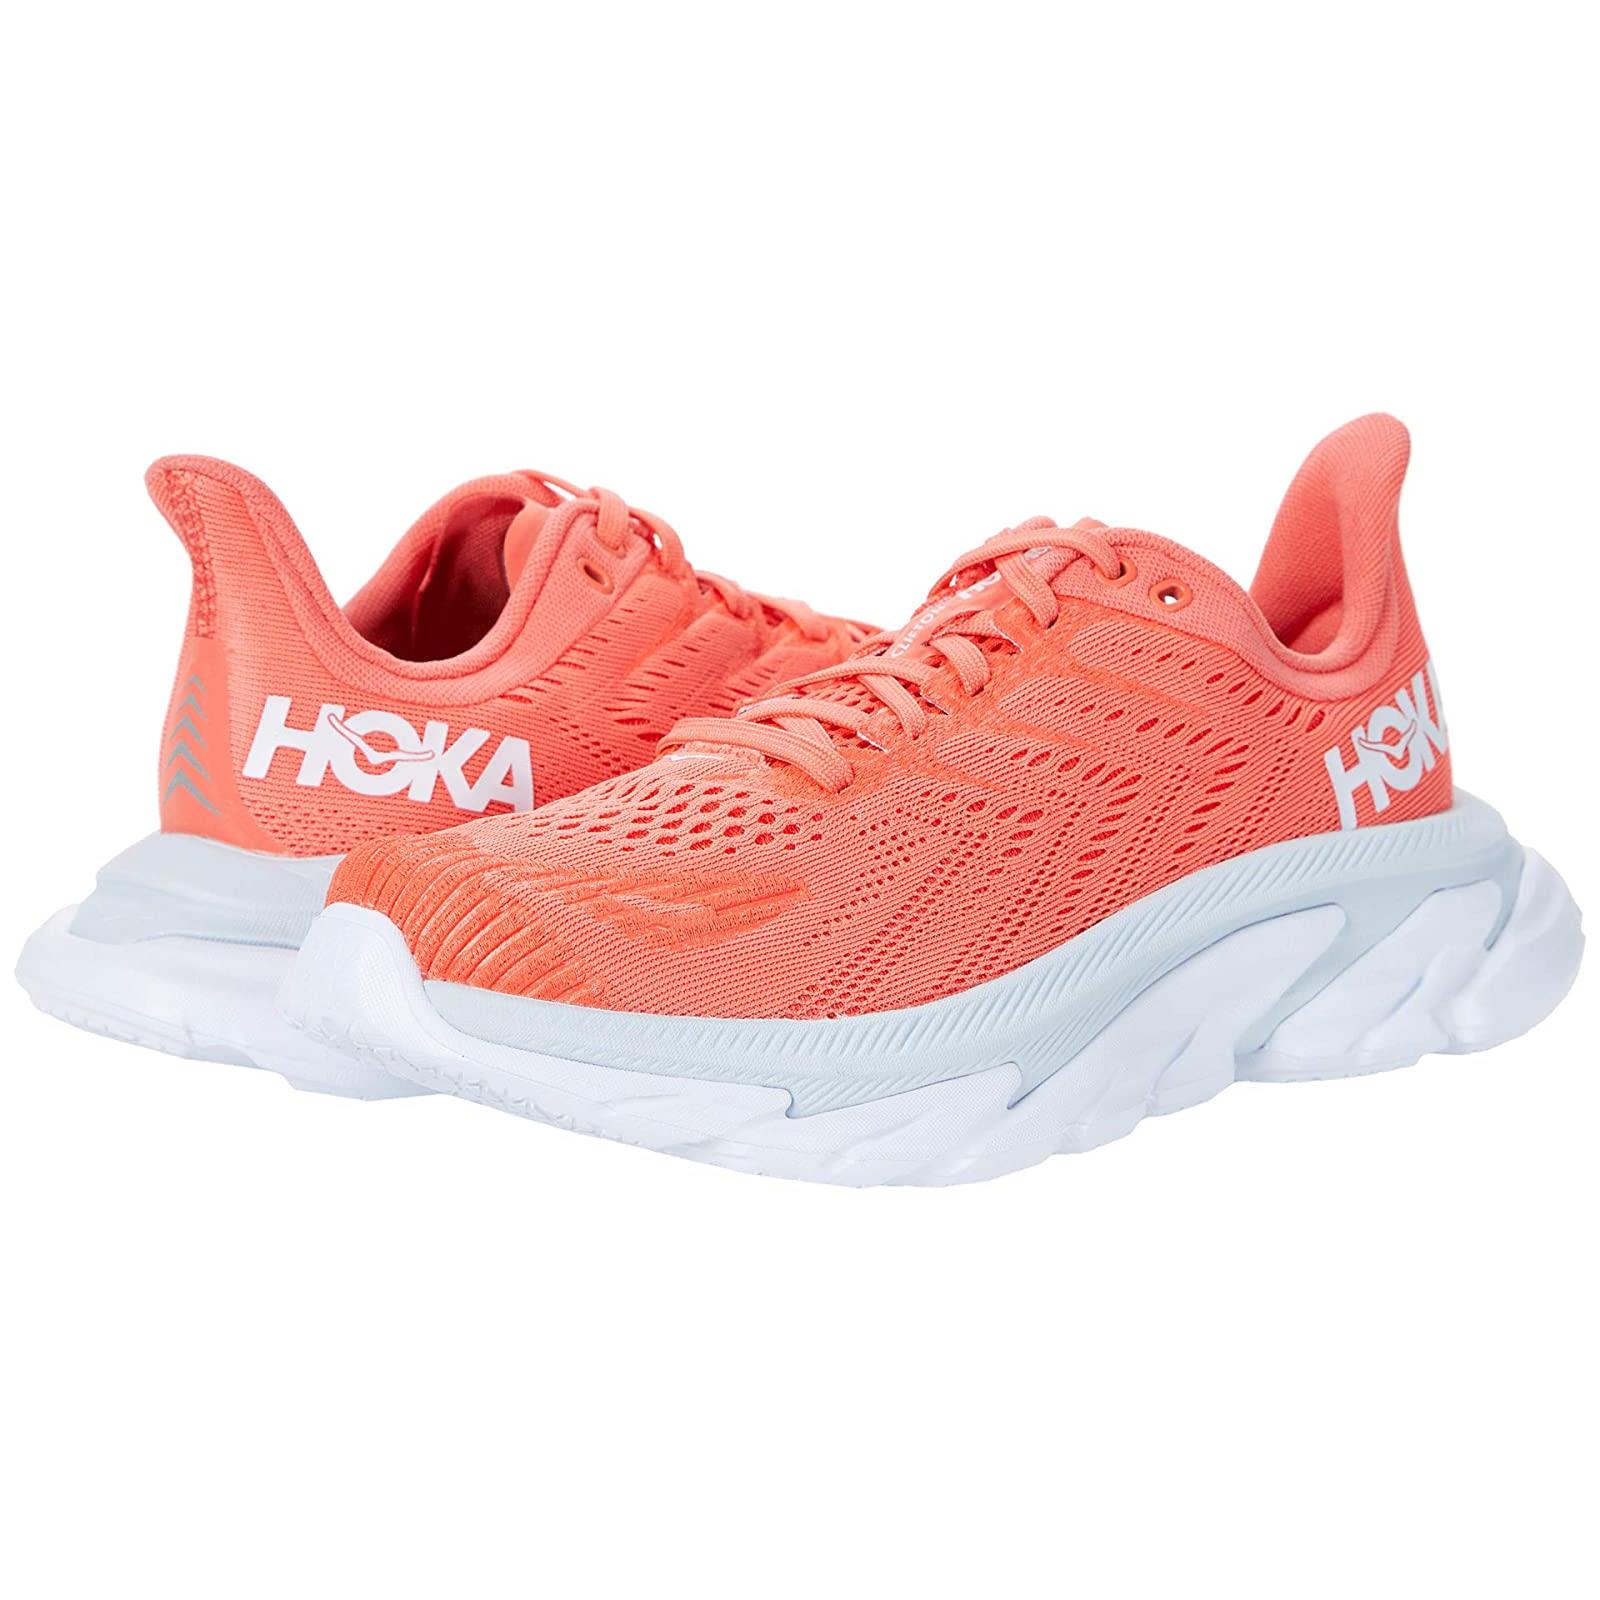 Woman`s Sneakers Athletic Shoes Hoka One One Clifton Edge Hot Coral/White